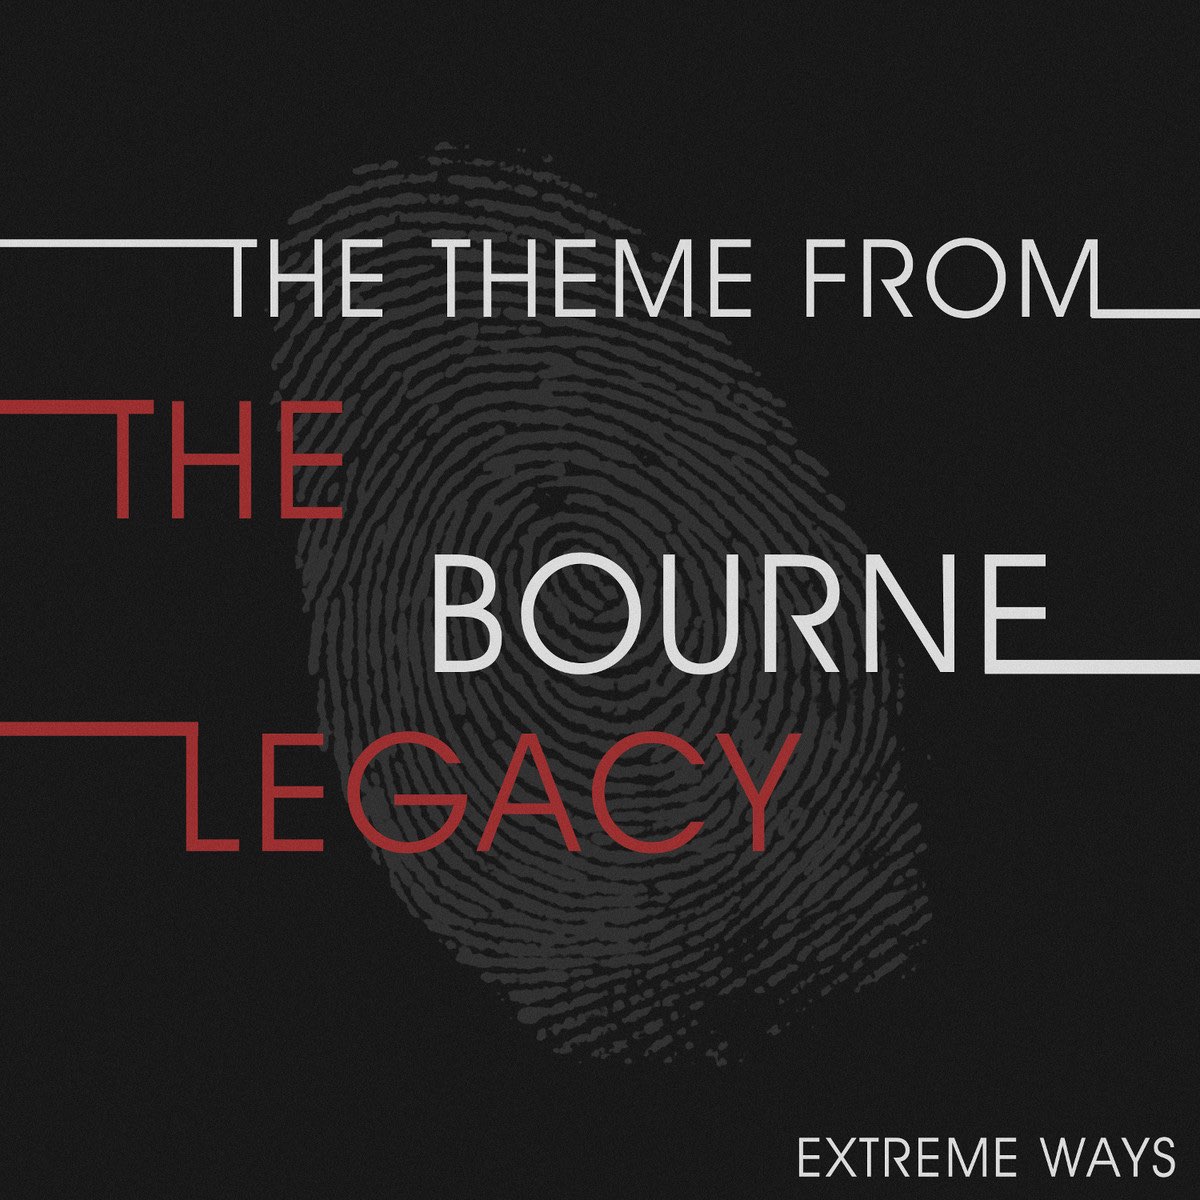 The Theme from the Bourne Legacy (Extreme Ways) - Single by Thematic Pianos  & Anime Kei on Apple Music